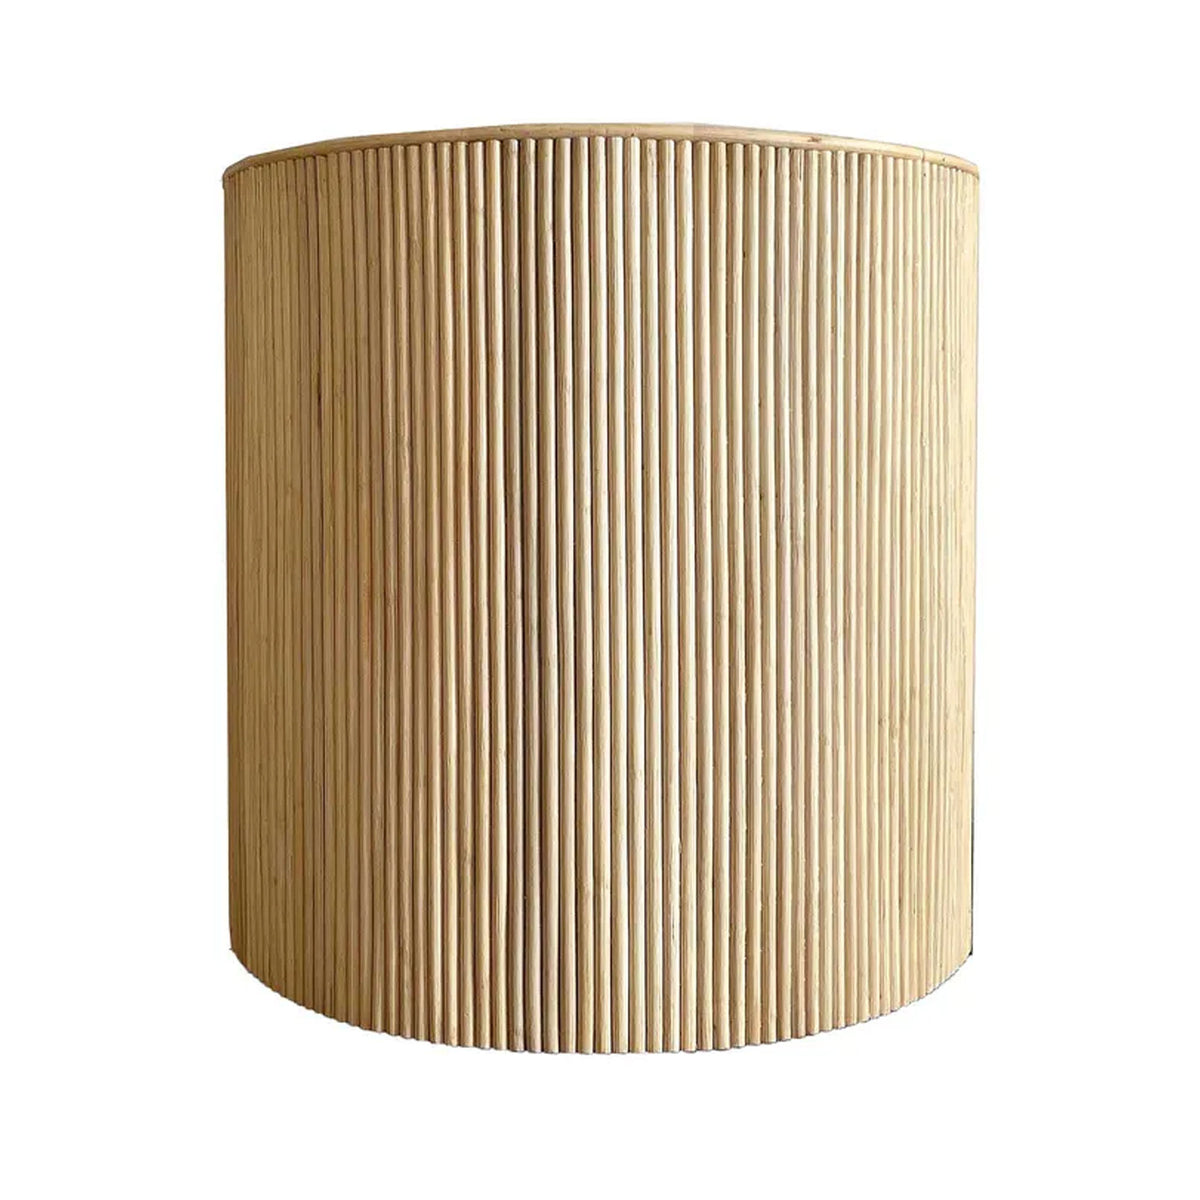 Sia Wooden Side Table - Natural - Notbrand